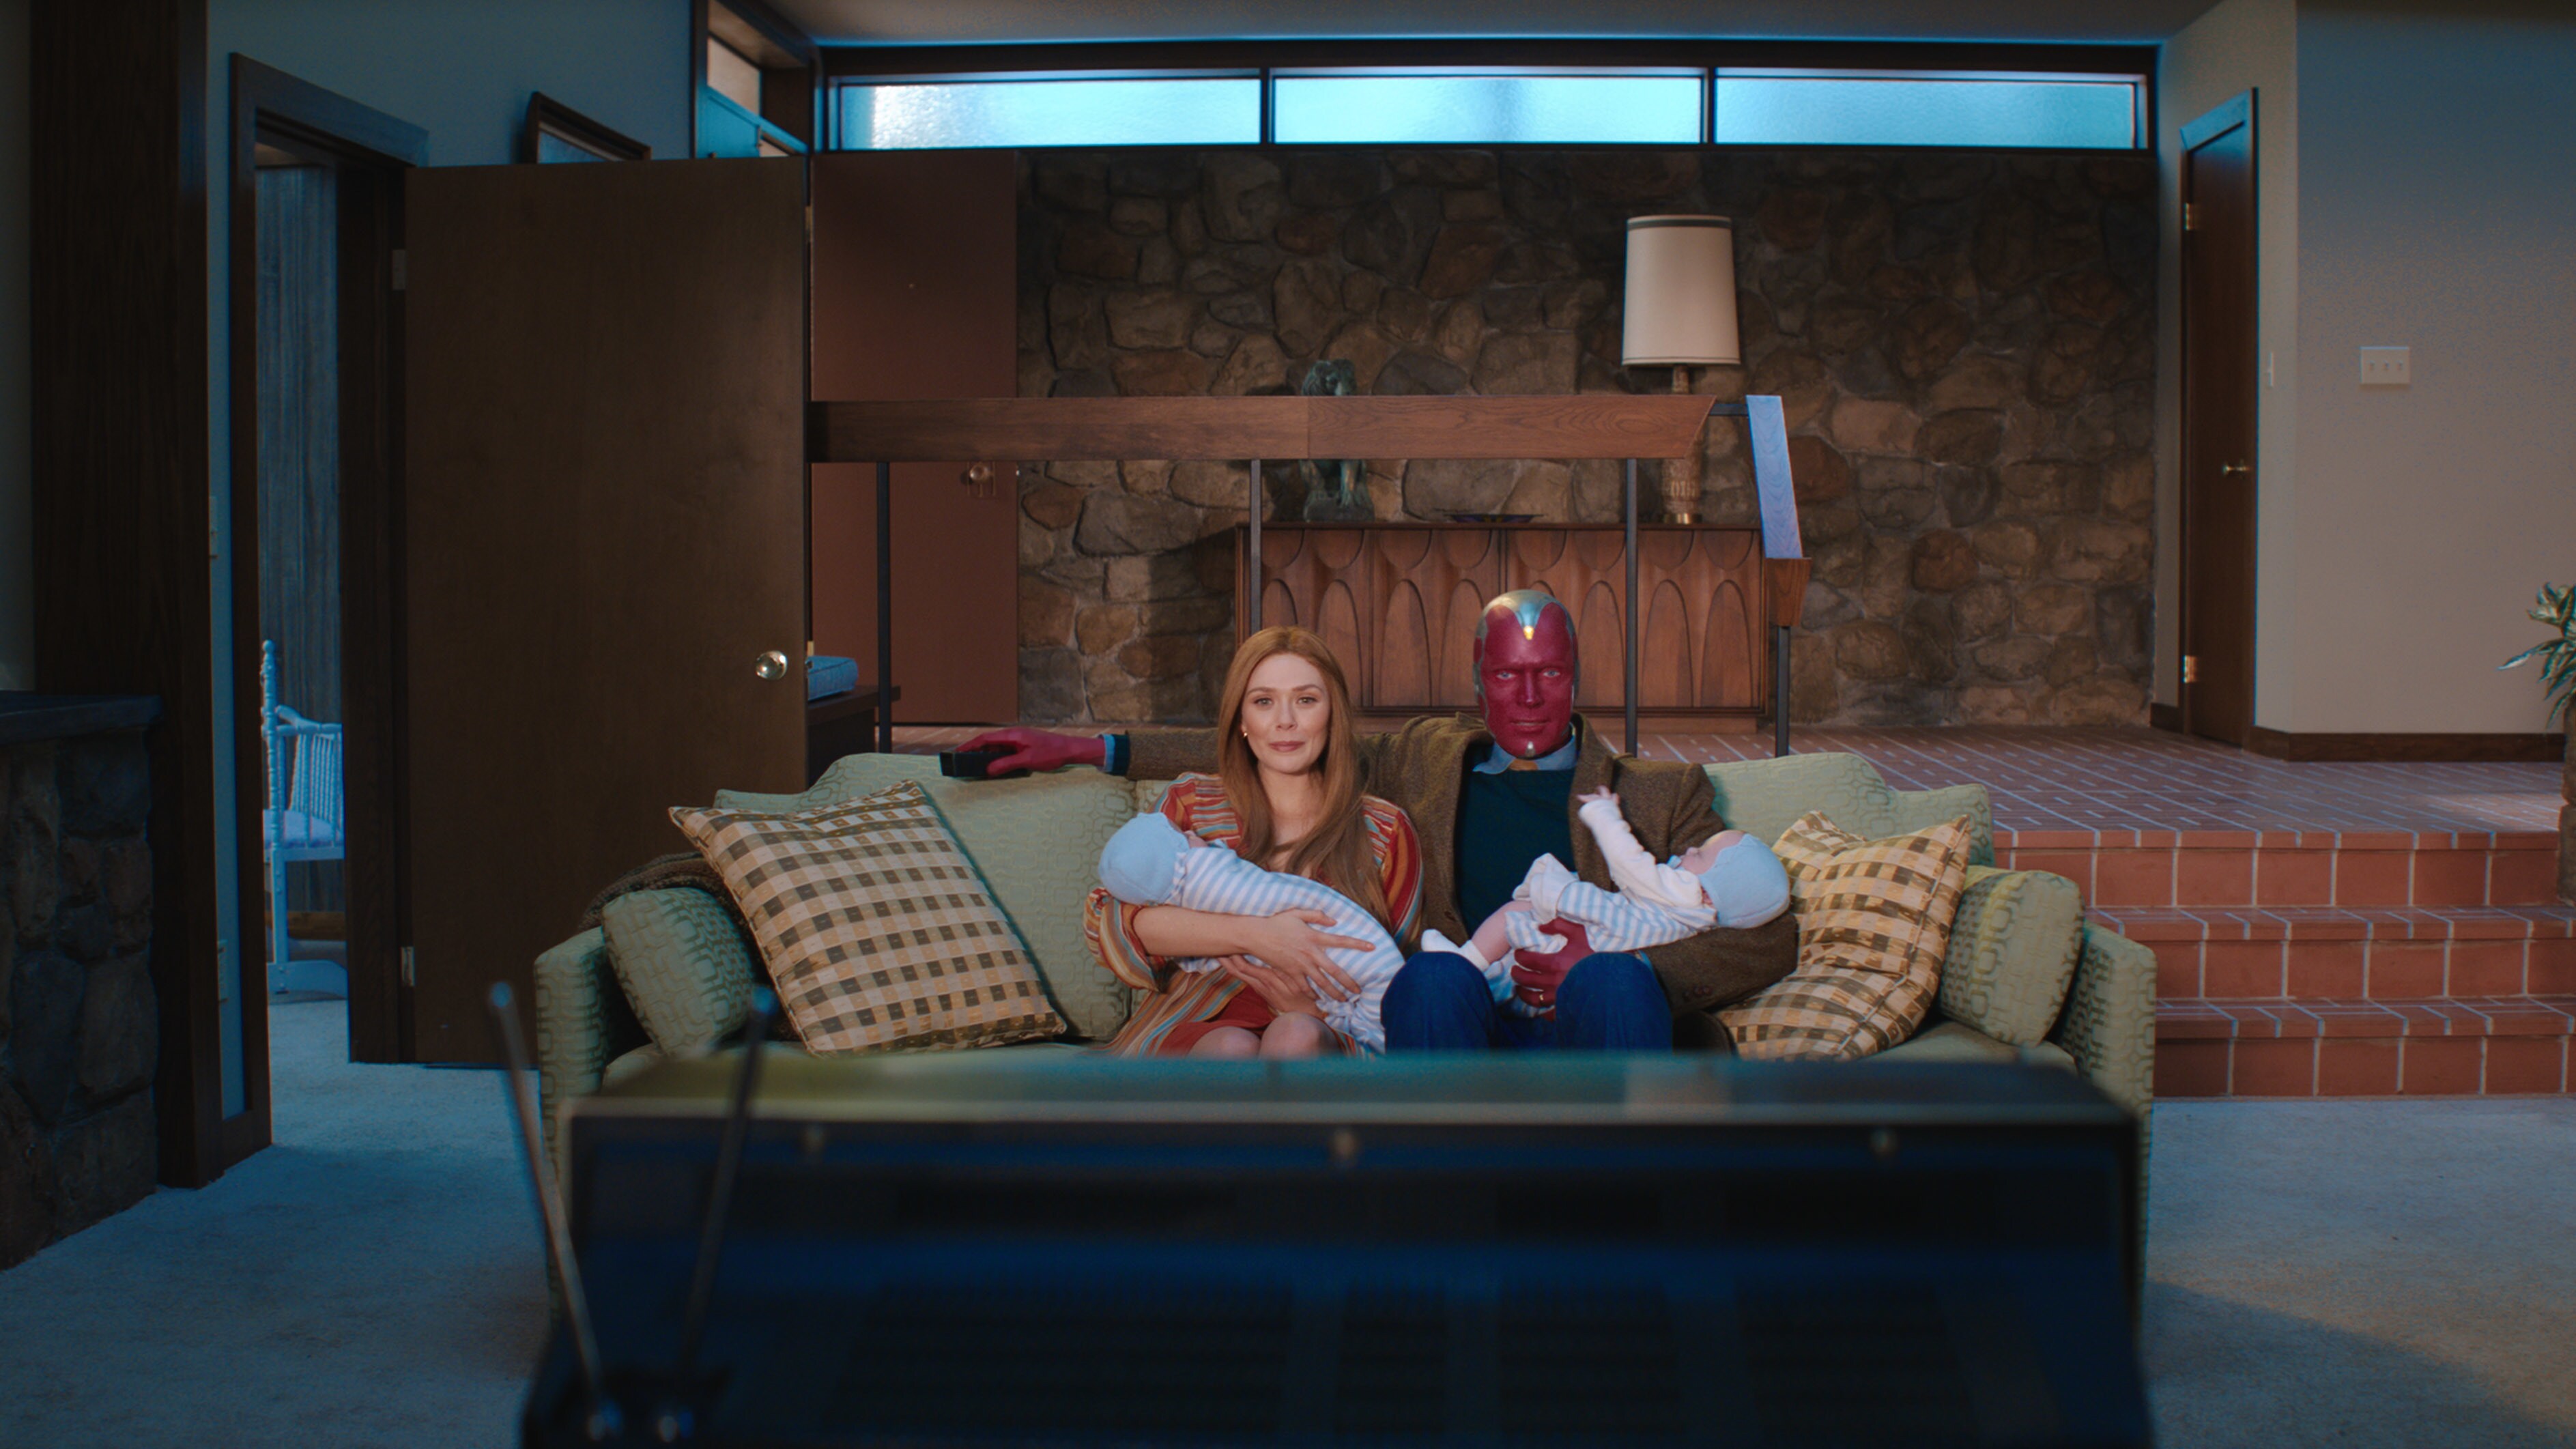 (L-R): Elizabeth Olsen as Wanda Maximoff and Paul Bettany as Vision in Marvel Studios' WANDAVISION exclusively on Disney+. Photo courtesy of Marvel Studios. ©Marvel Studios 2021. All Rights Reserved.